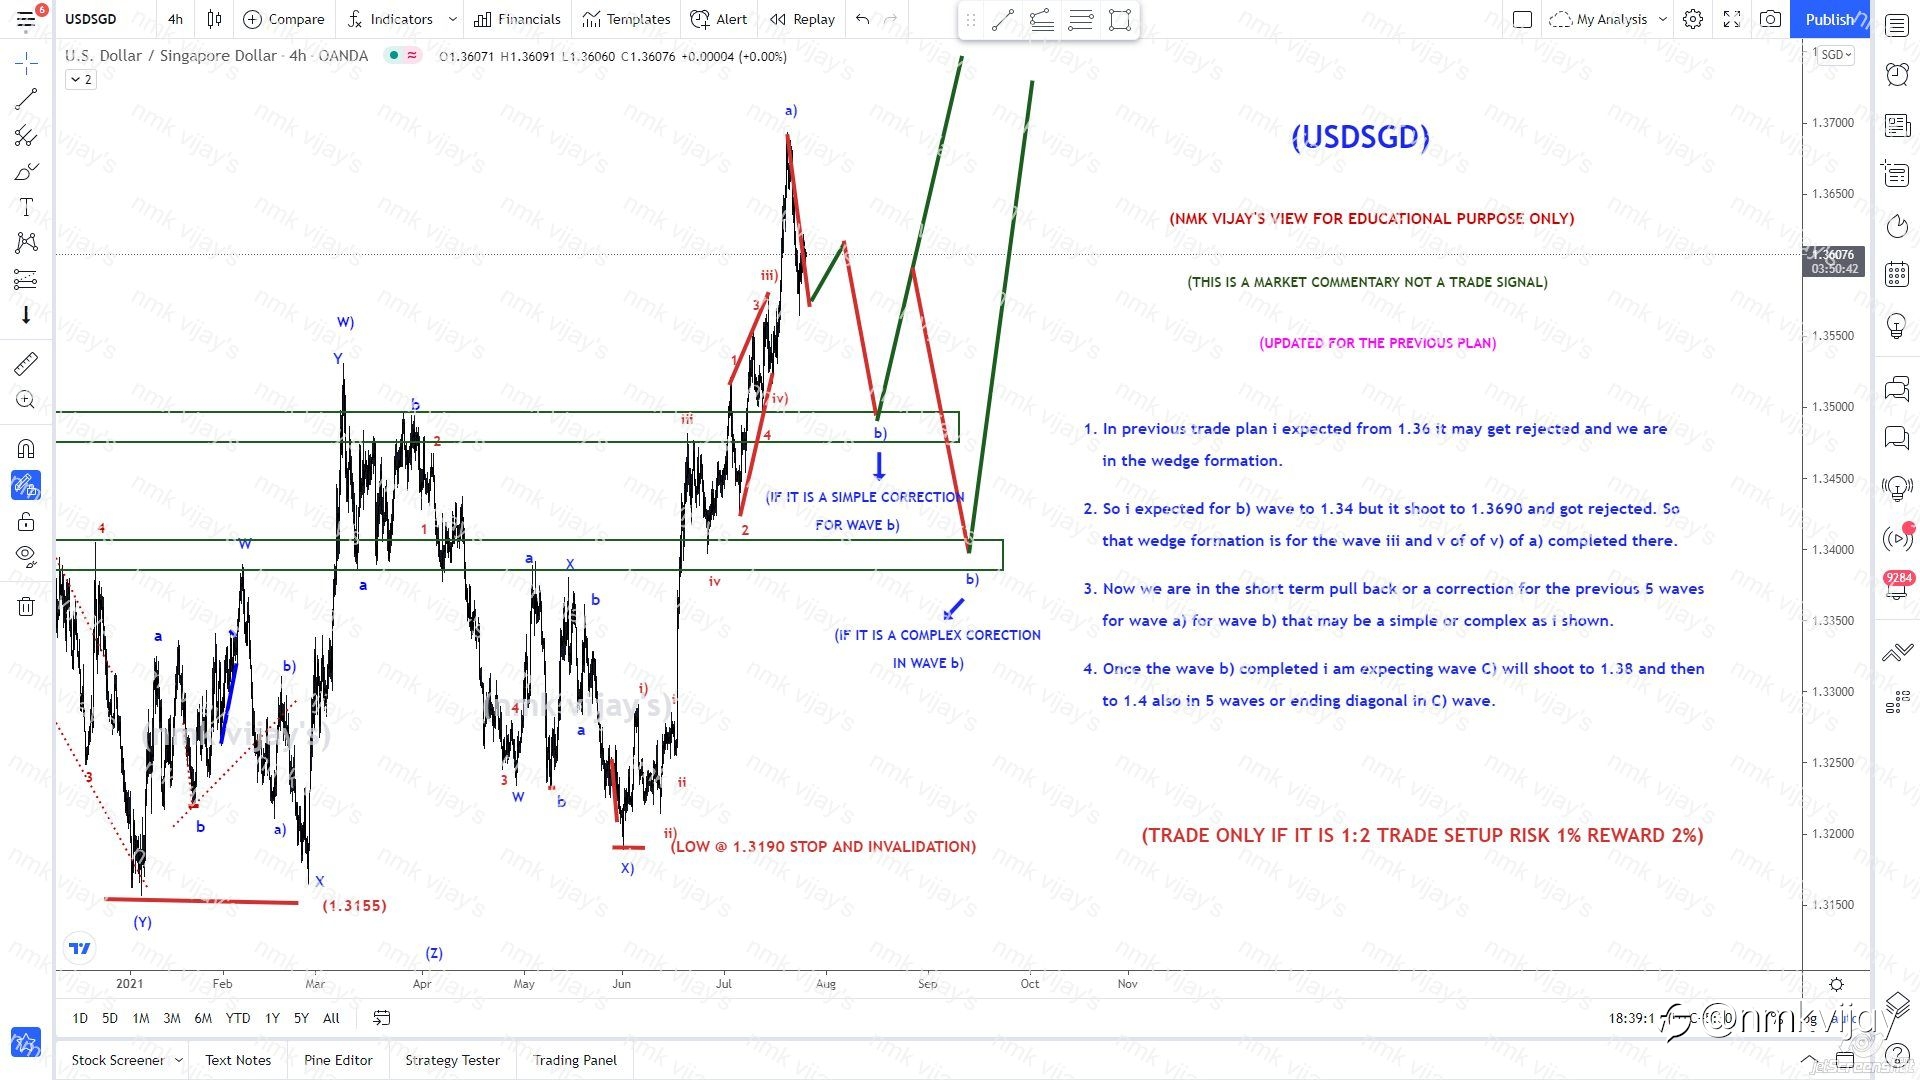 USDSGD-Wave b) in progress may be simple or complex to 1.34 ?